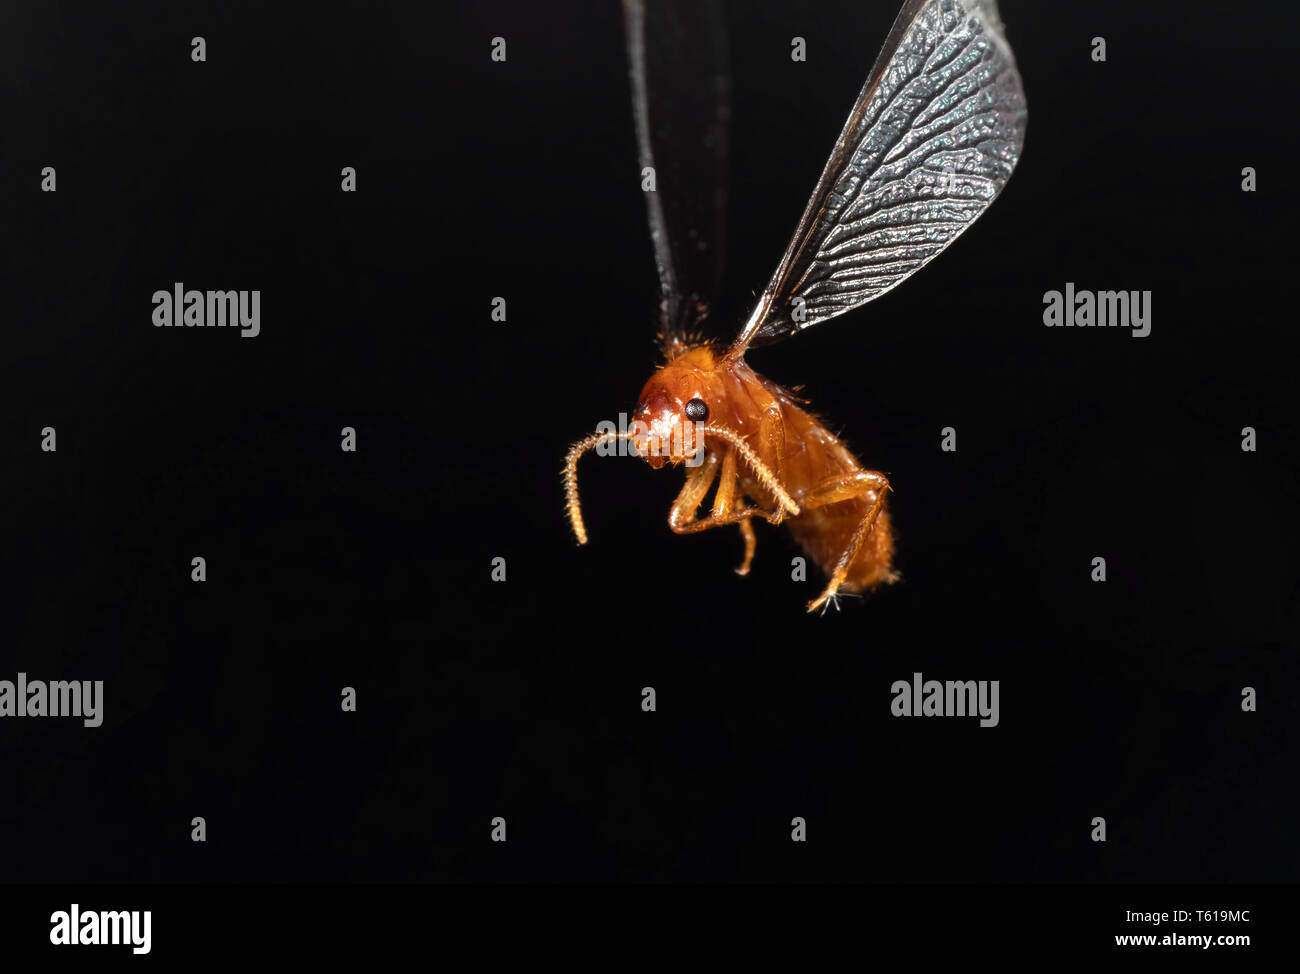 Macro Photography of Little Insect Flying Isolated on Black Background Stock Photo